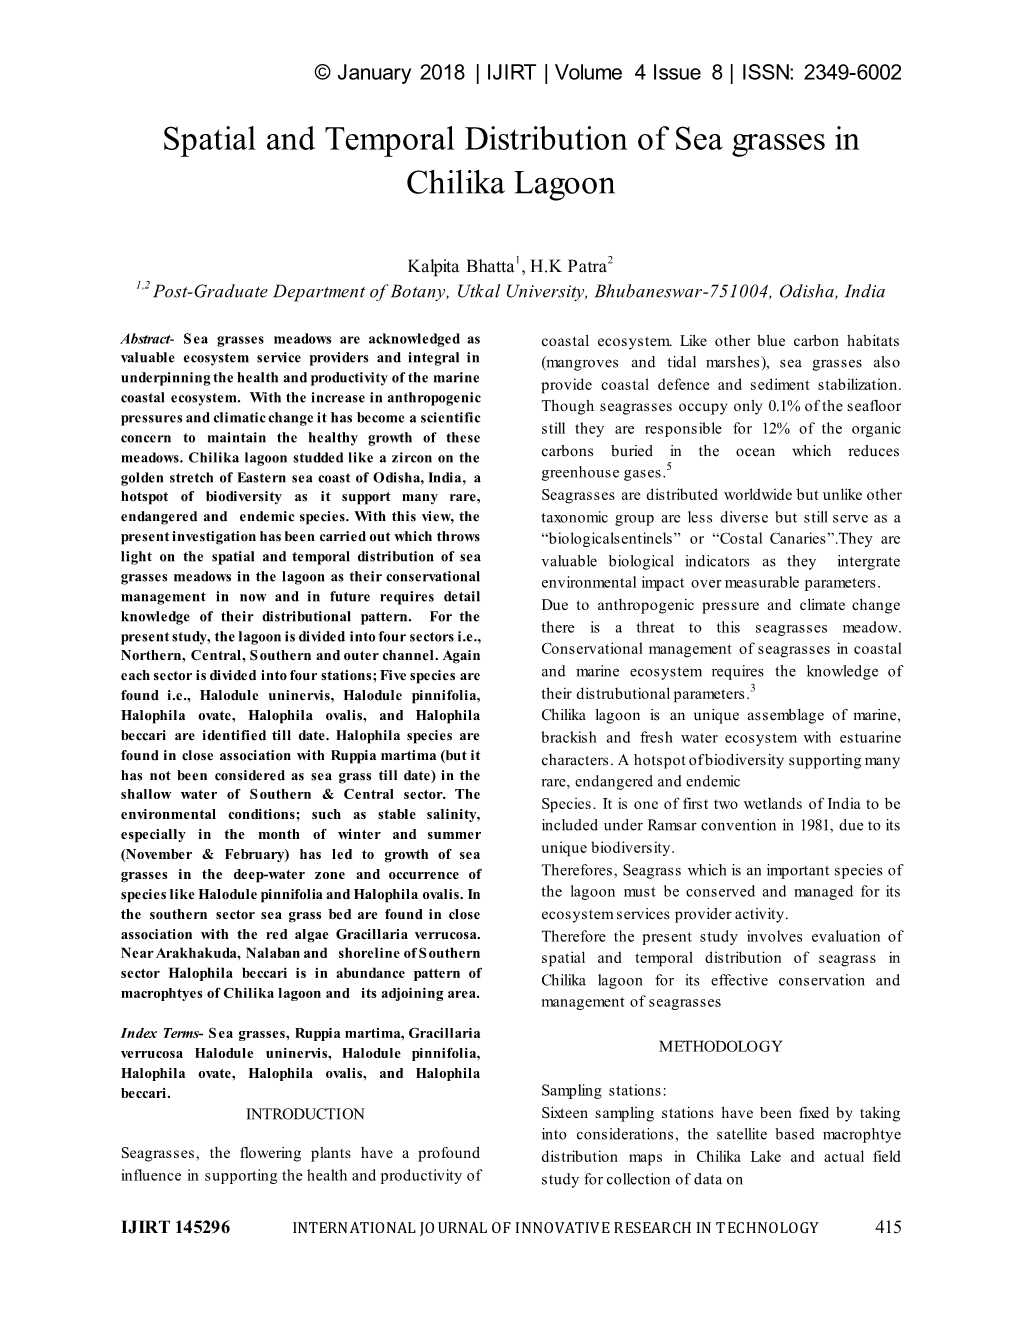 Spatial and Temporal Distribution of Sea Grasses in Chilika Lagoon